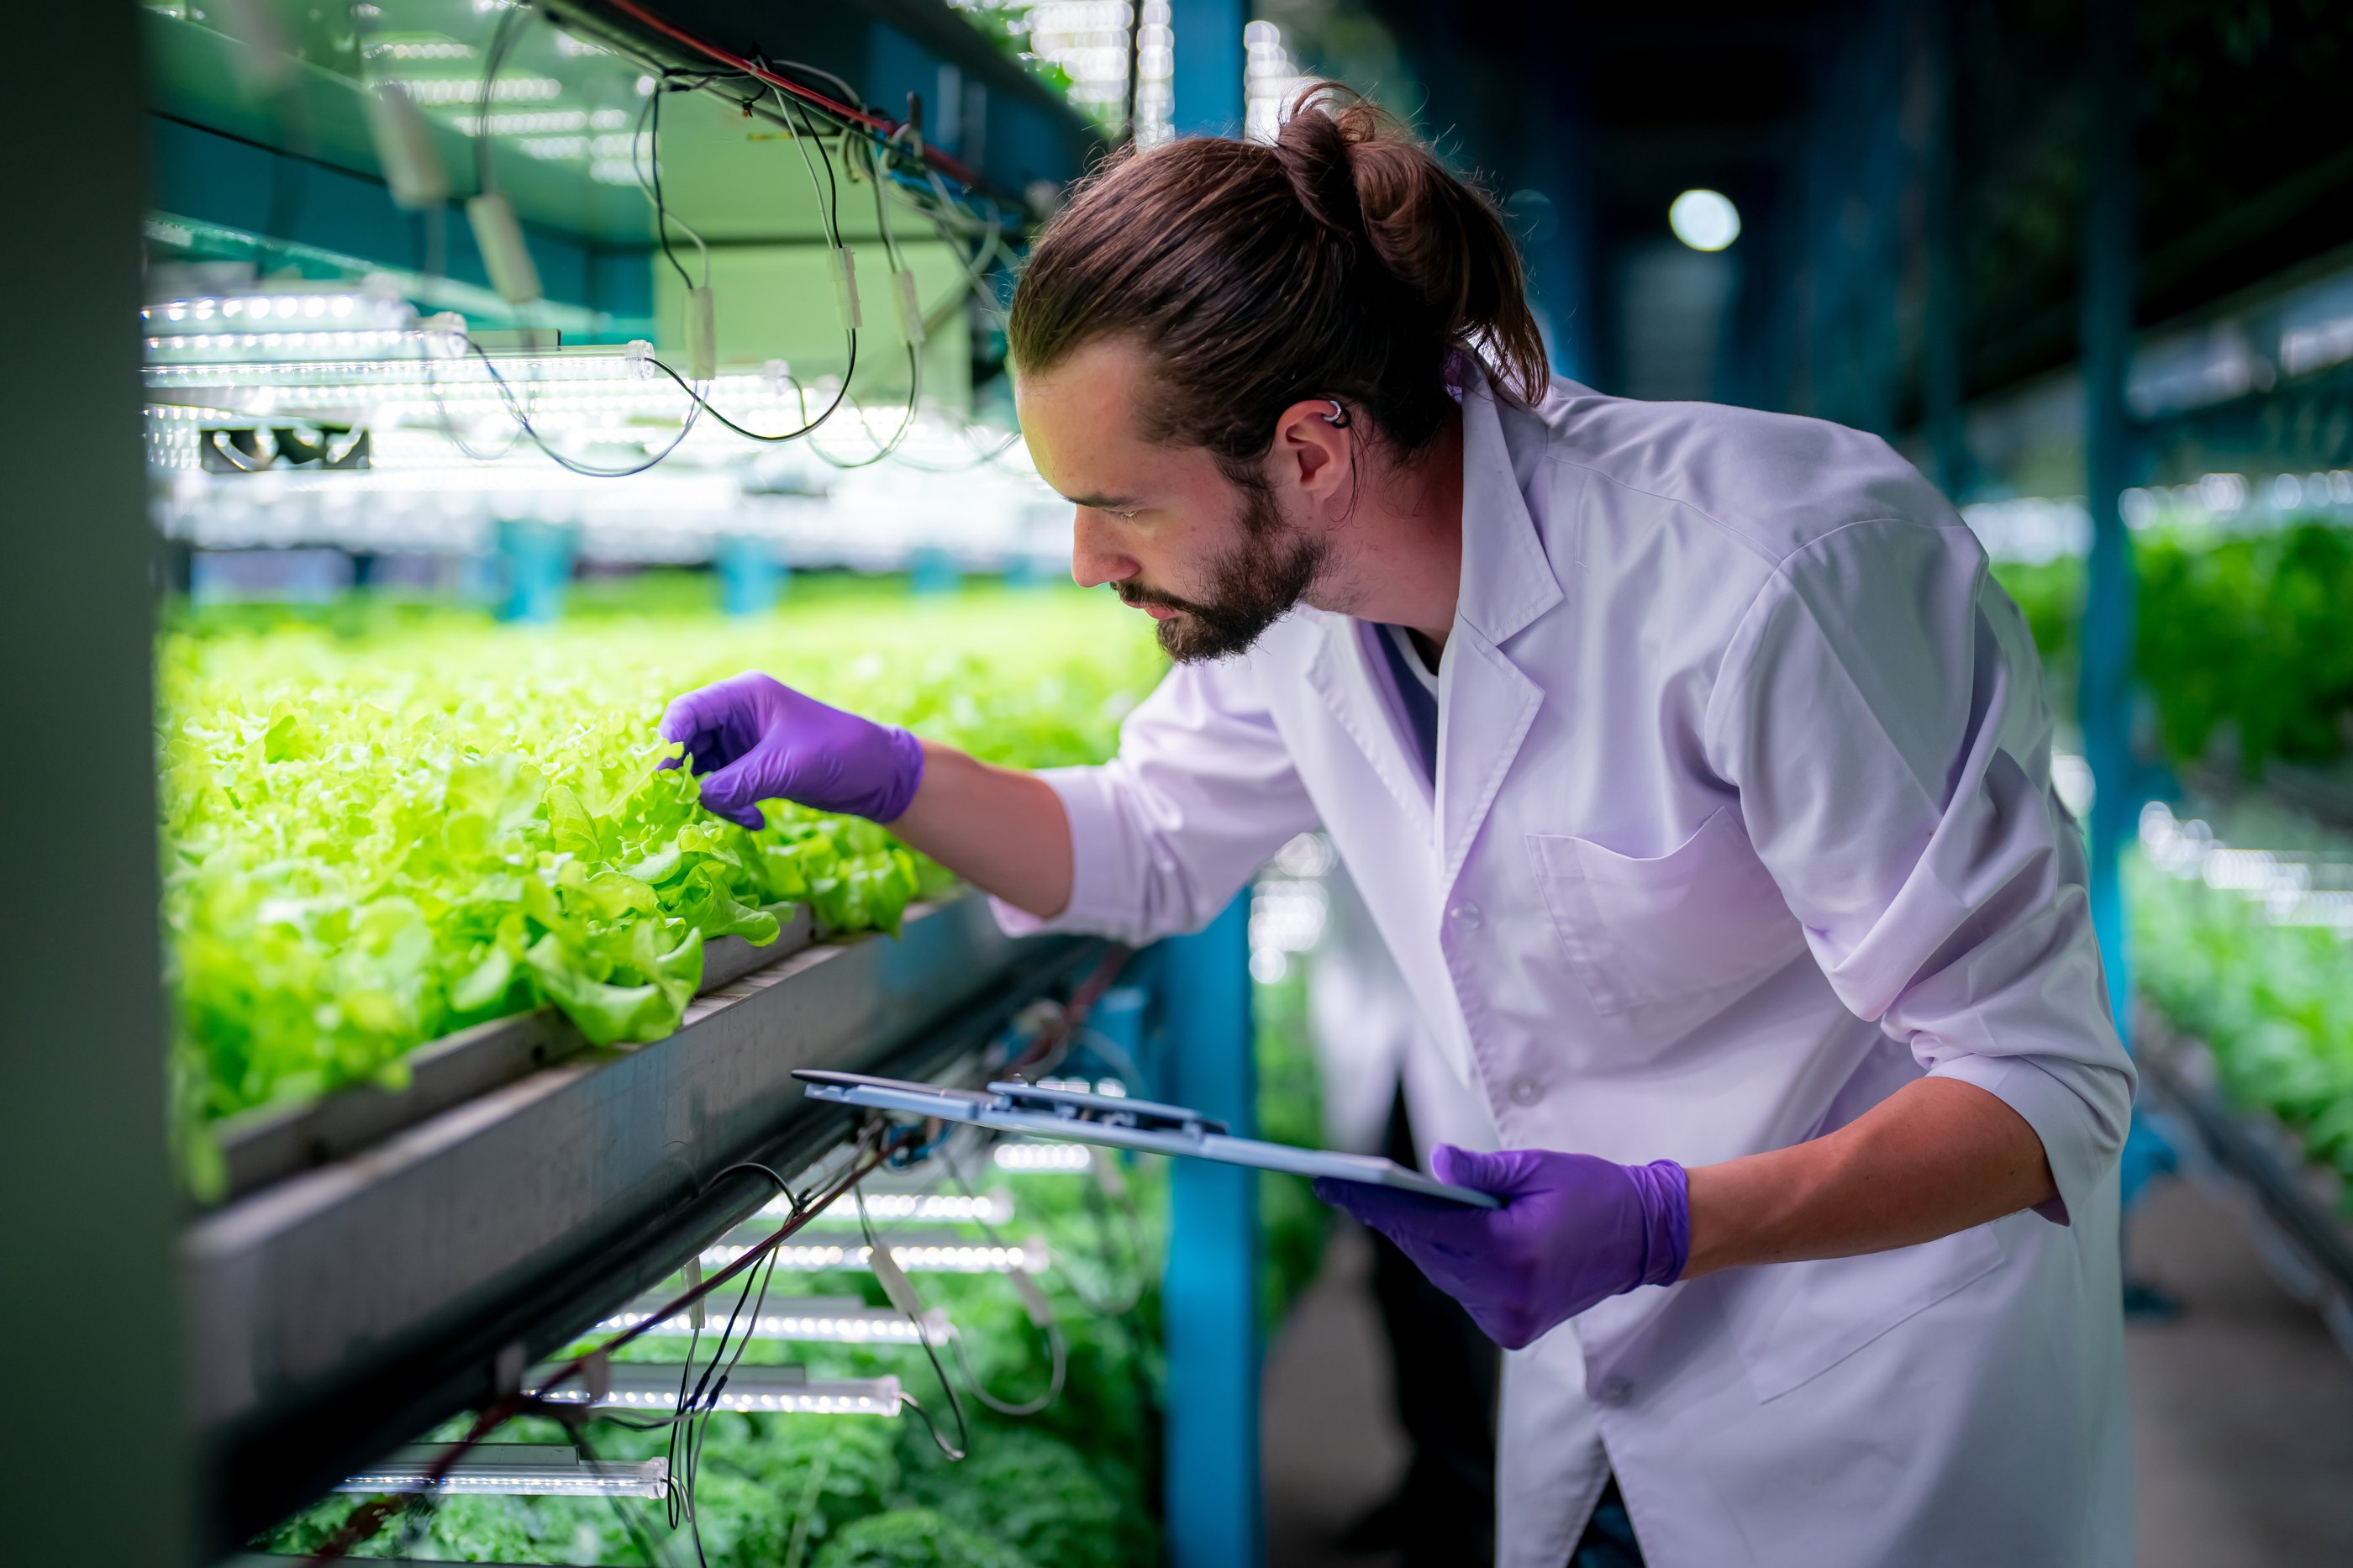 Man wearing white lab coat and latex gloves is holding a clipboard in one hand and is visually assessing a plant with the other. He is in a room with rows of plant shelving - a vertical farm.